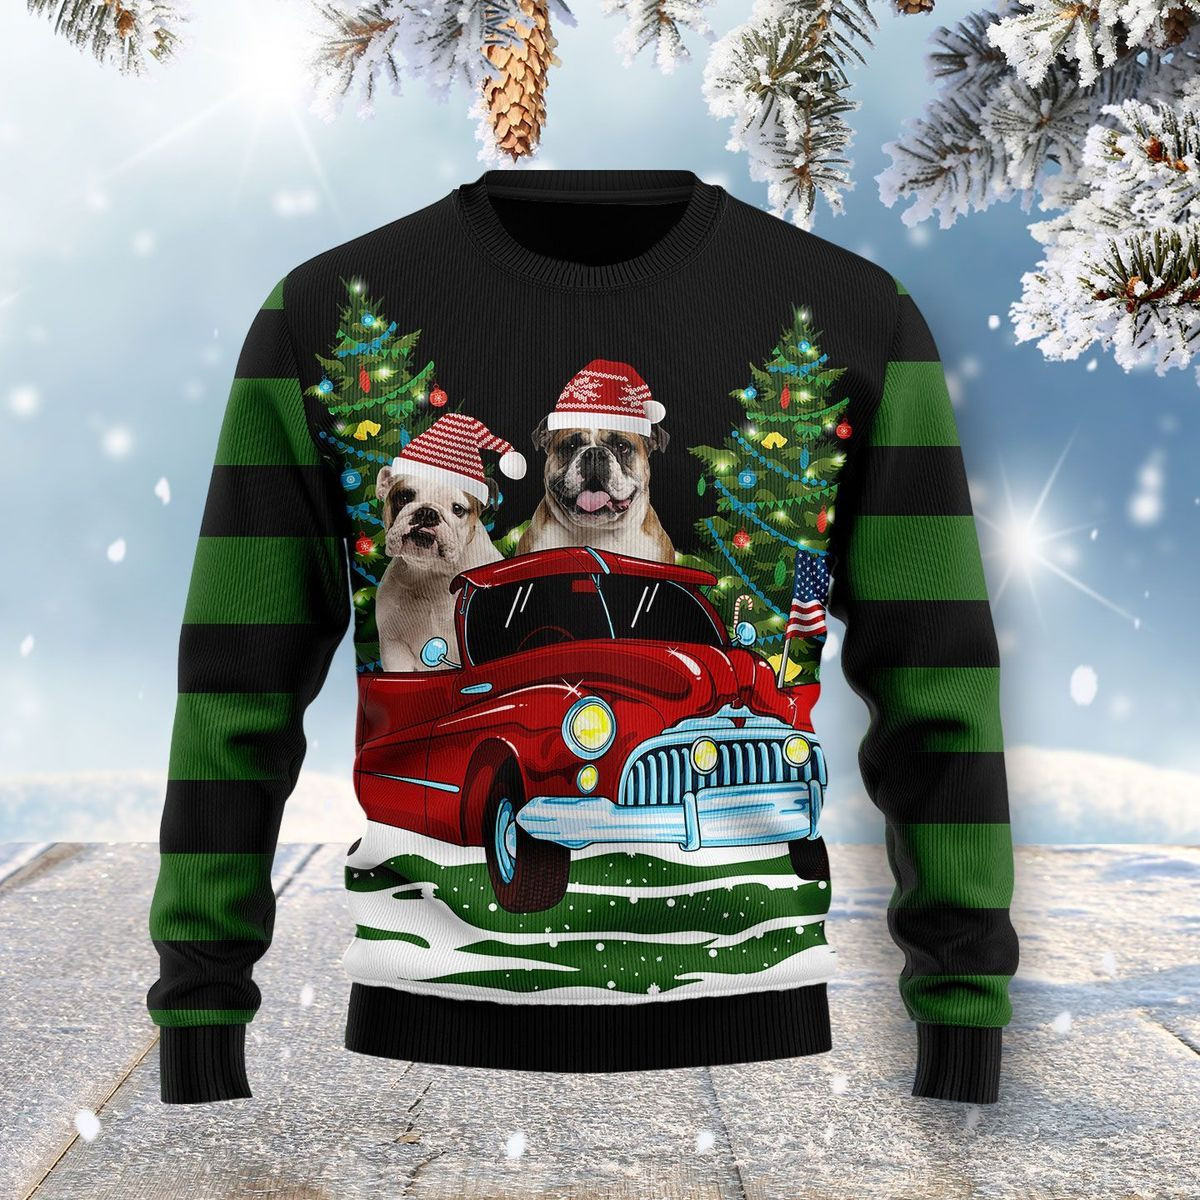 Merry Christmas Pug Dog Ugly Christmas Sweater, Ugly Sweater For Men Women, Holiday Sweater